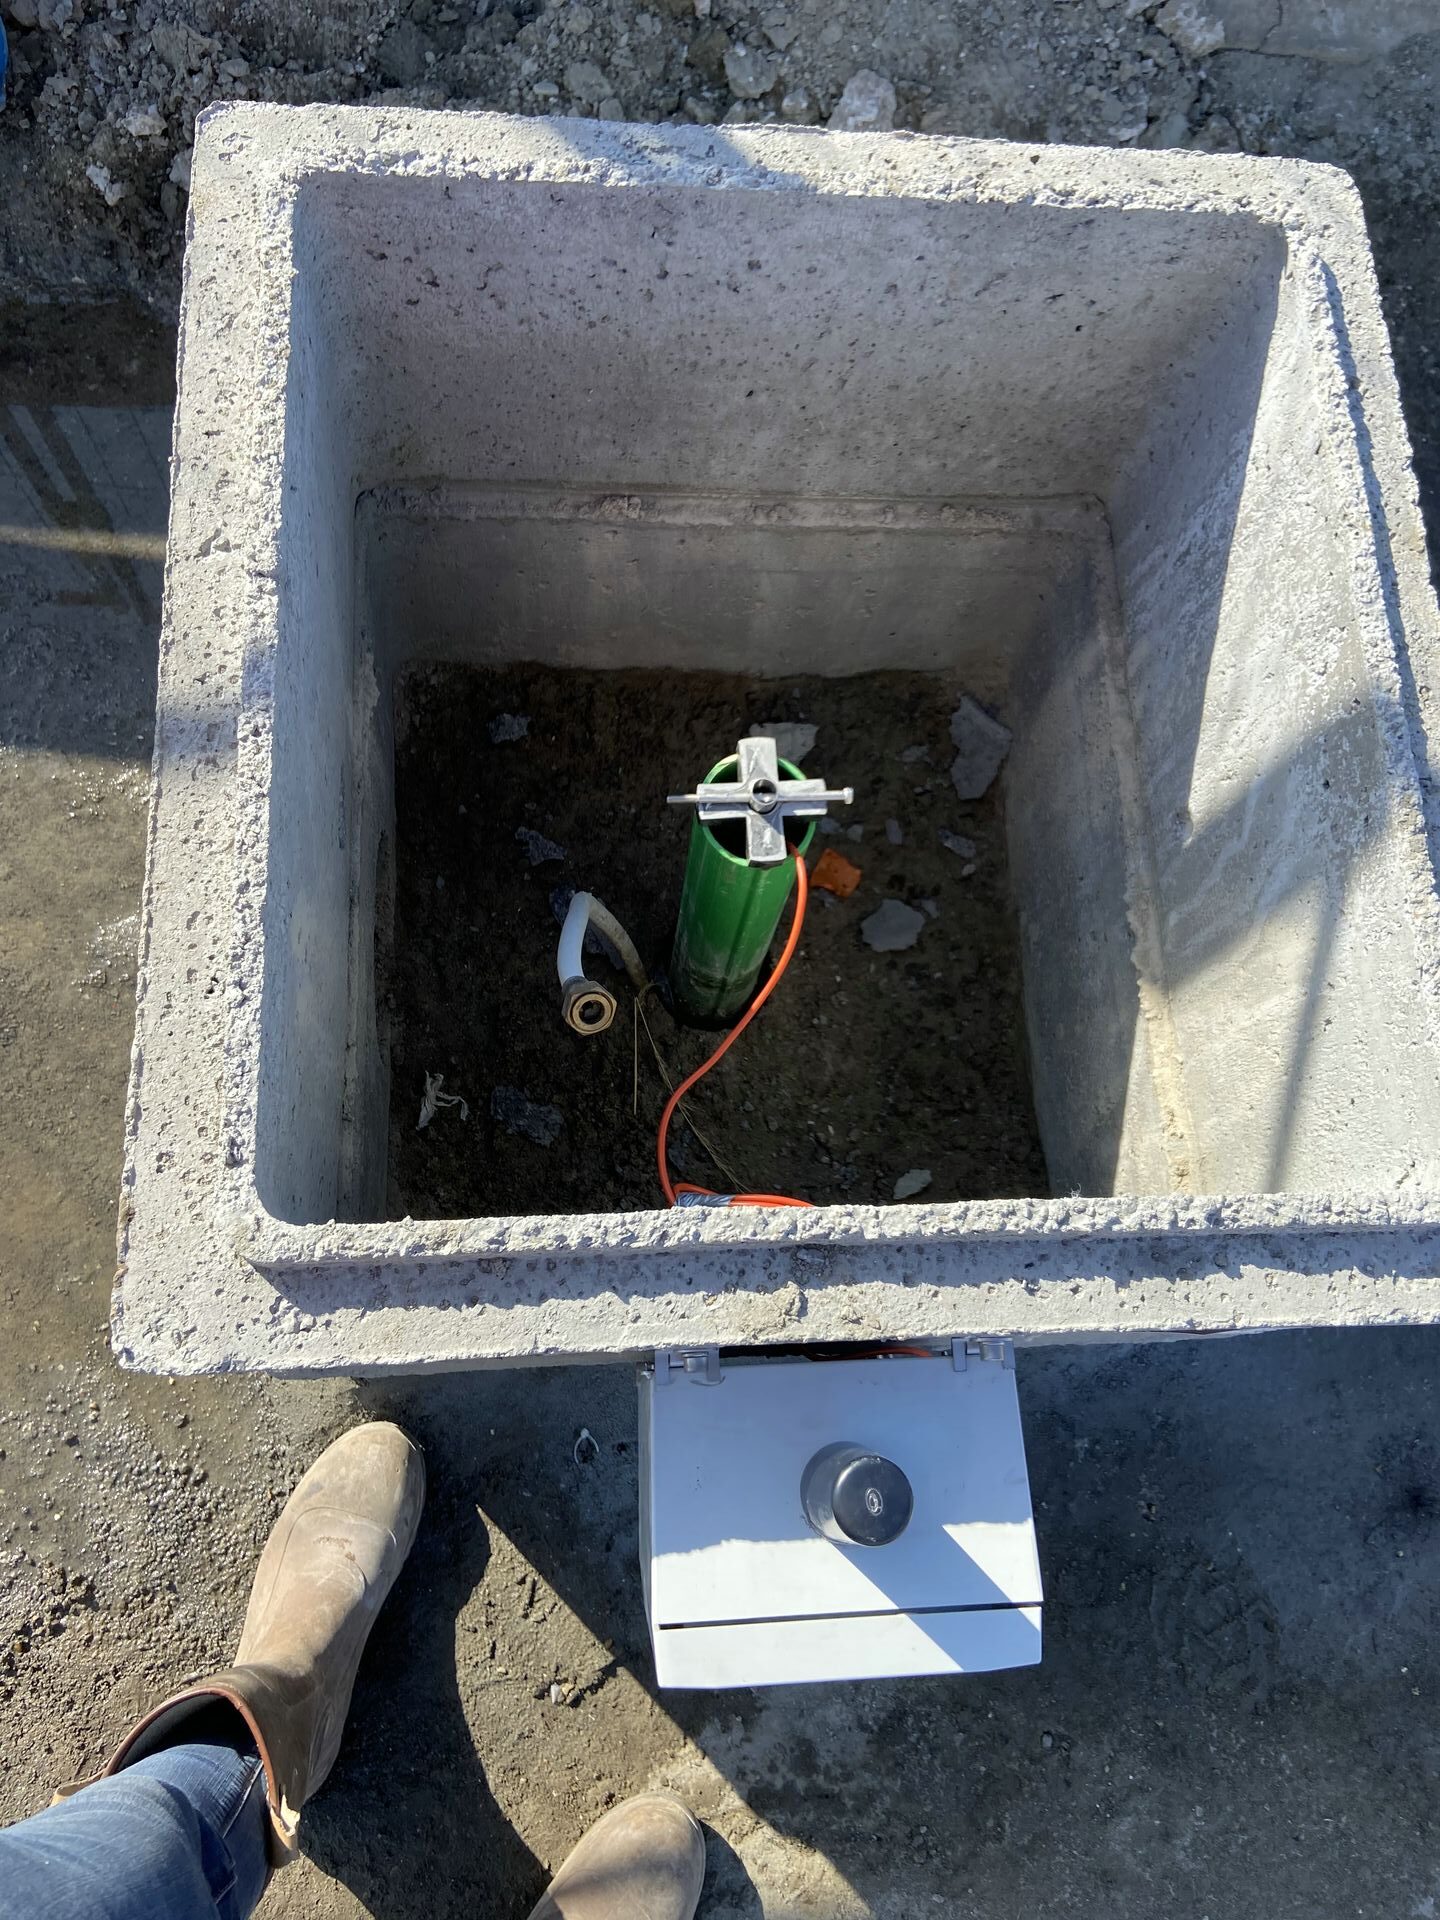 In-Place-Inclinometer sensor chain installed into the casing and supported onto the Top Cap, The sensors are daisy chained and a network cable is shown comming out of the rop of the casing going to a data logger,